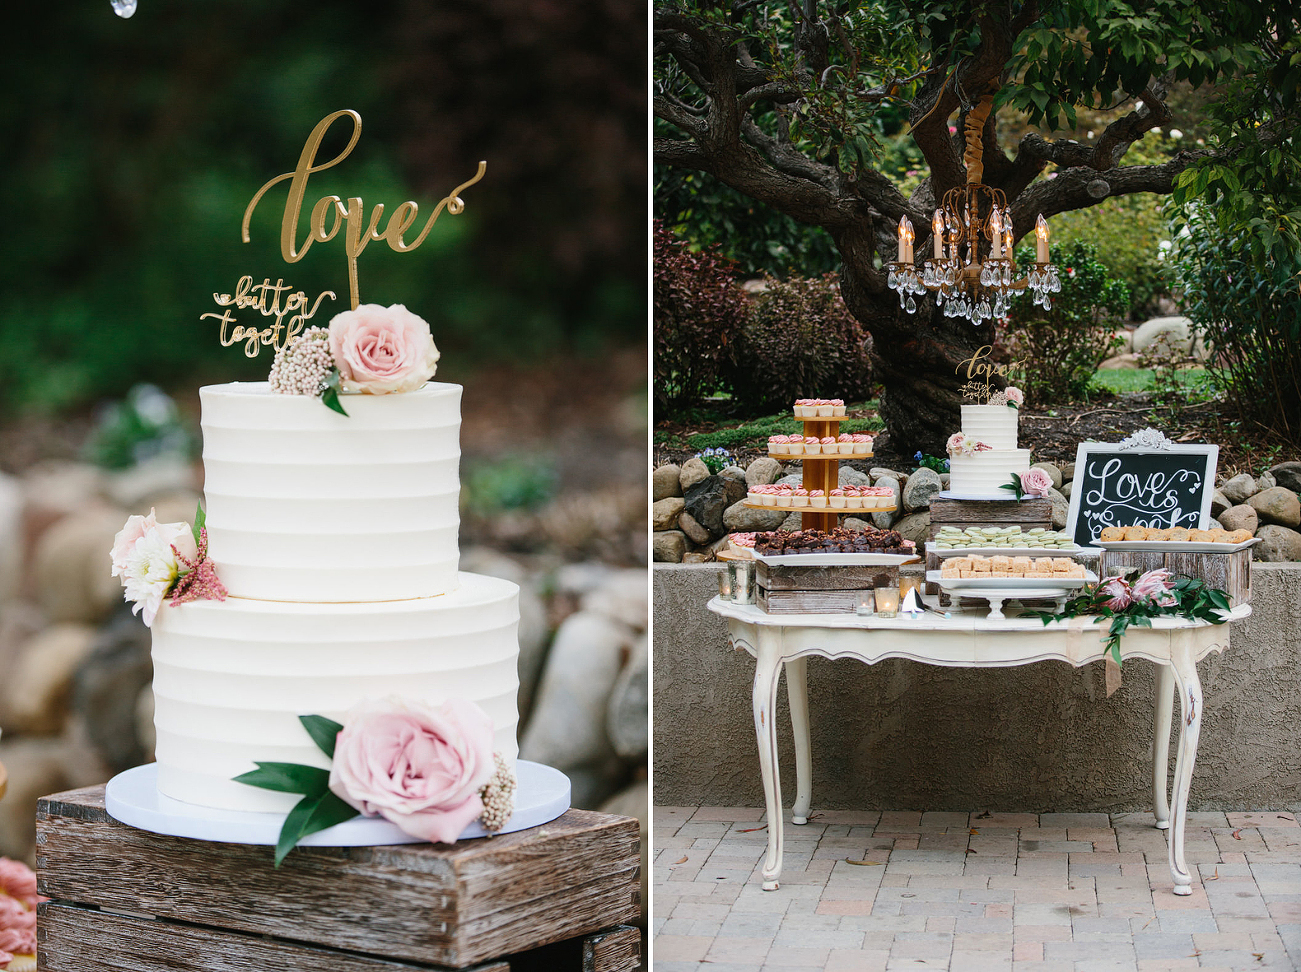 close up details of their wedding cake and dessert table